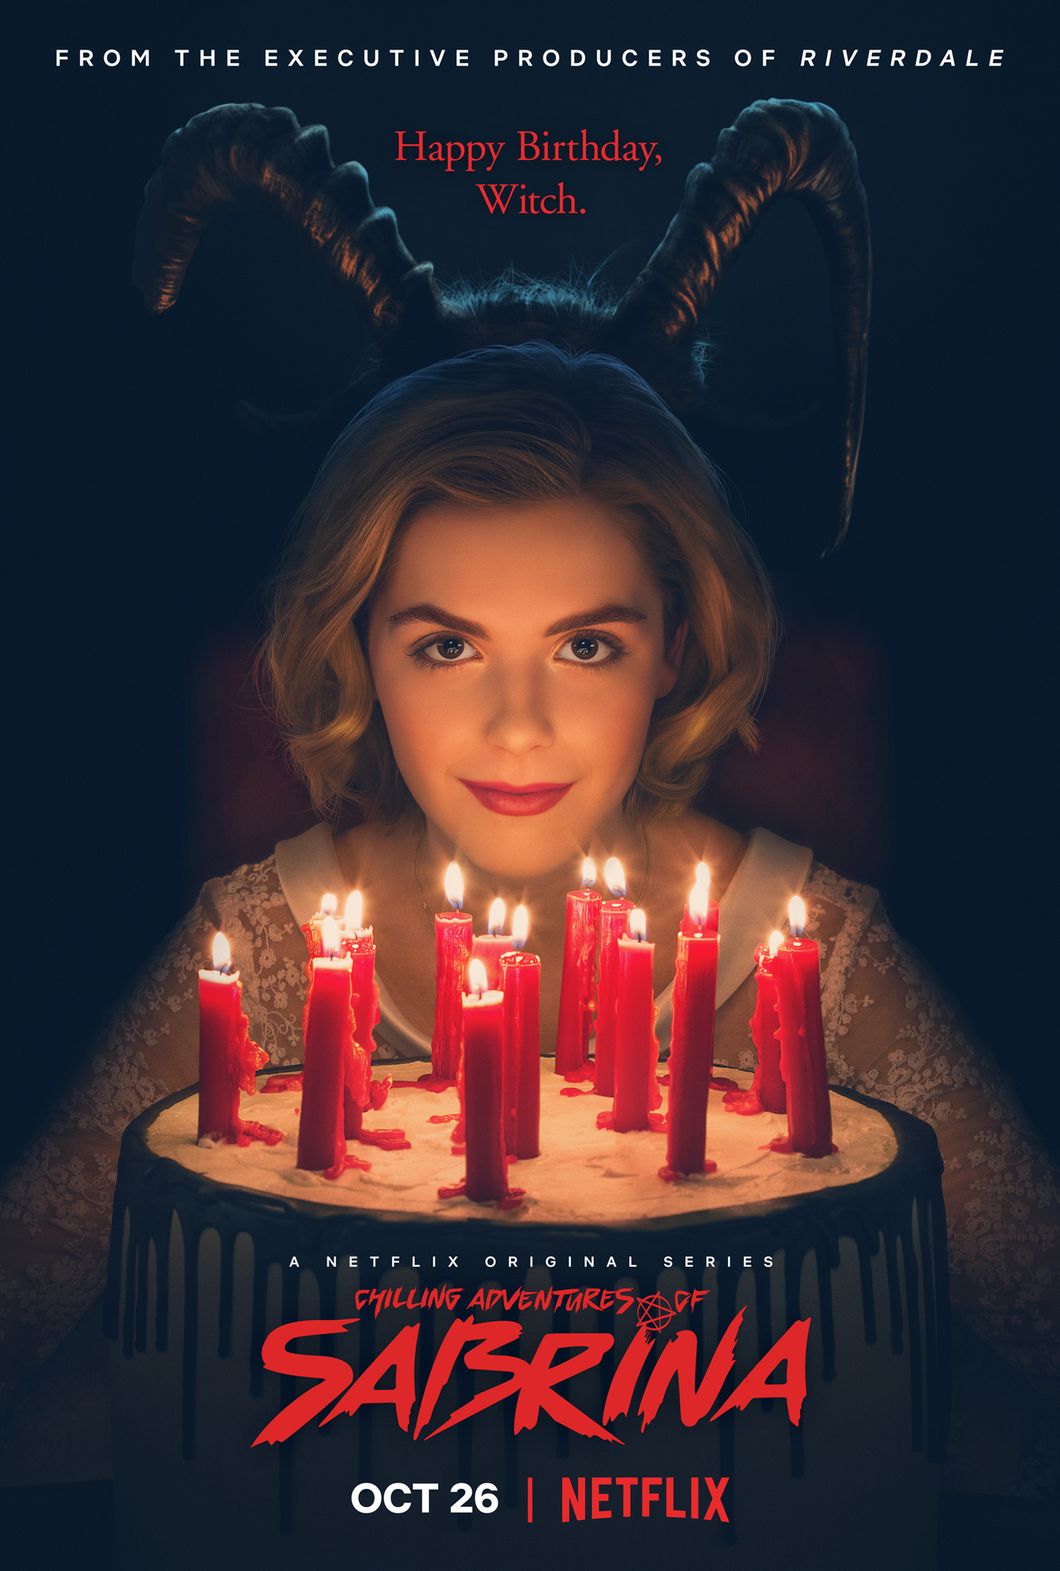 The New Netflix Series Is The Darker Side Of Sabrina We've Never Seen